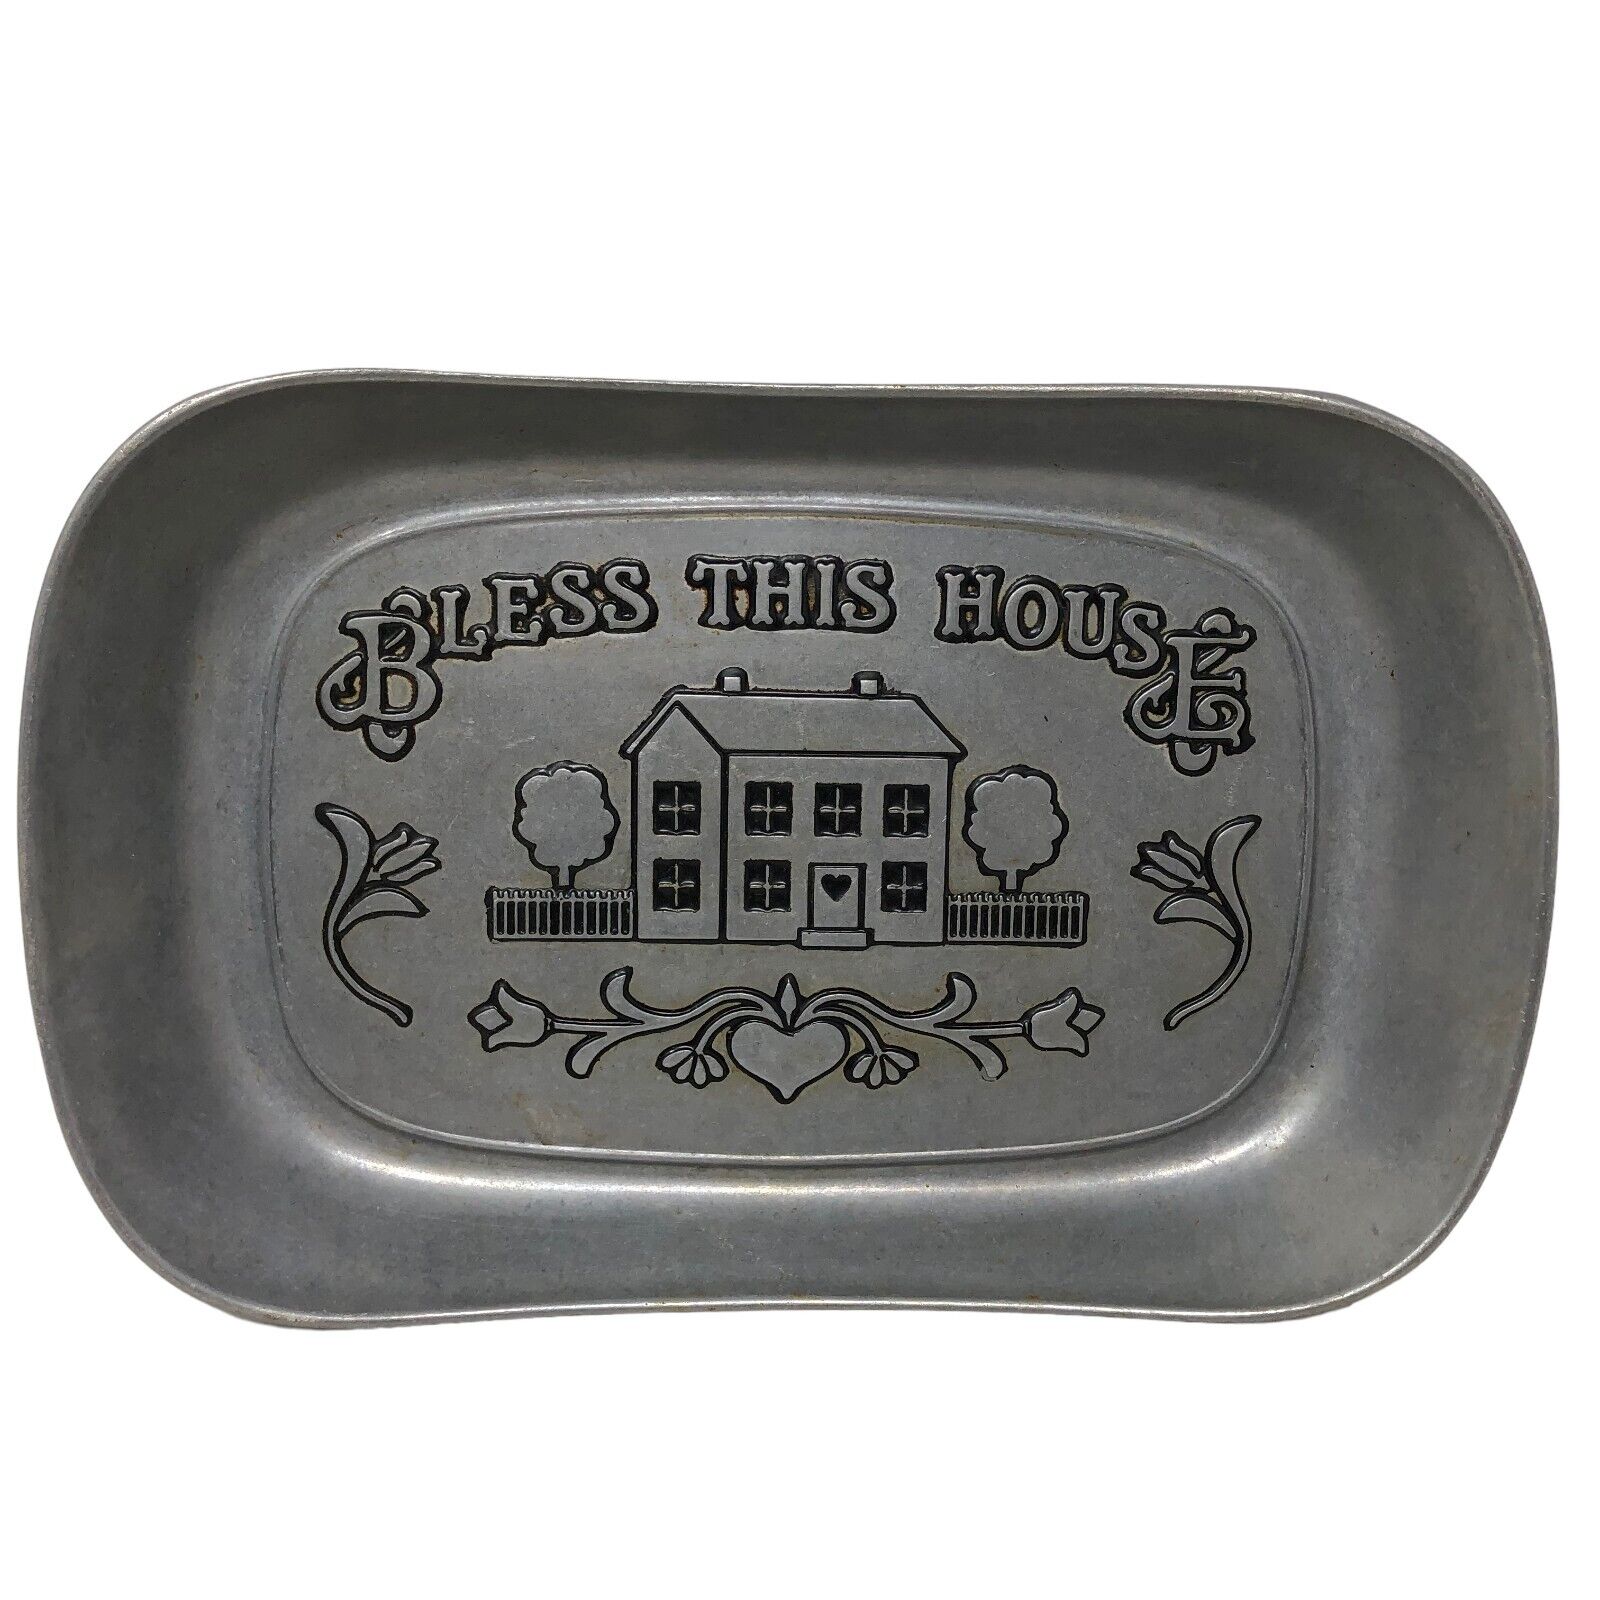 VTG Wilton Bless This House Pewter Bread Tray Made in USA Christian